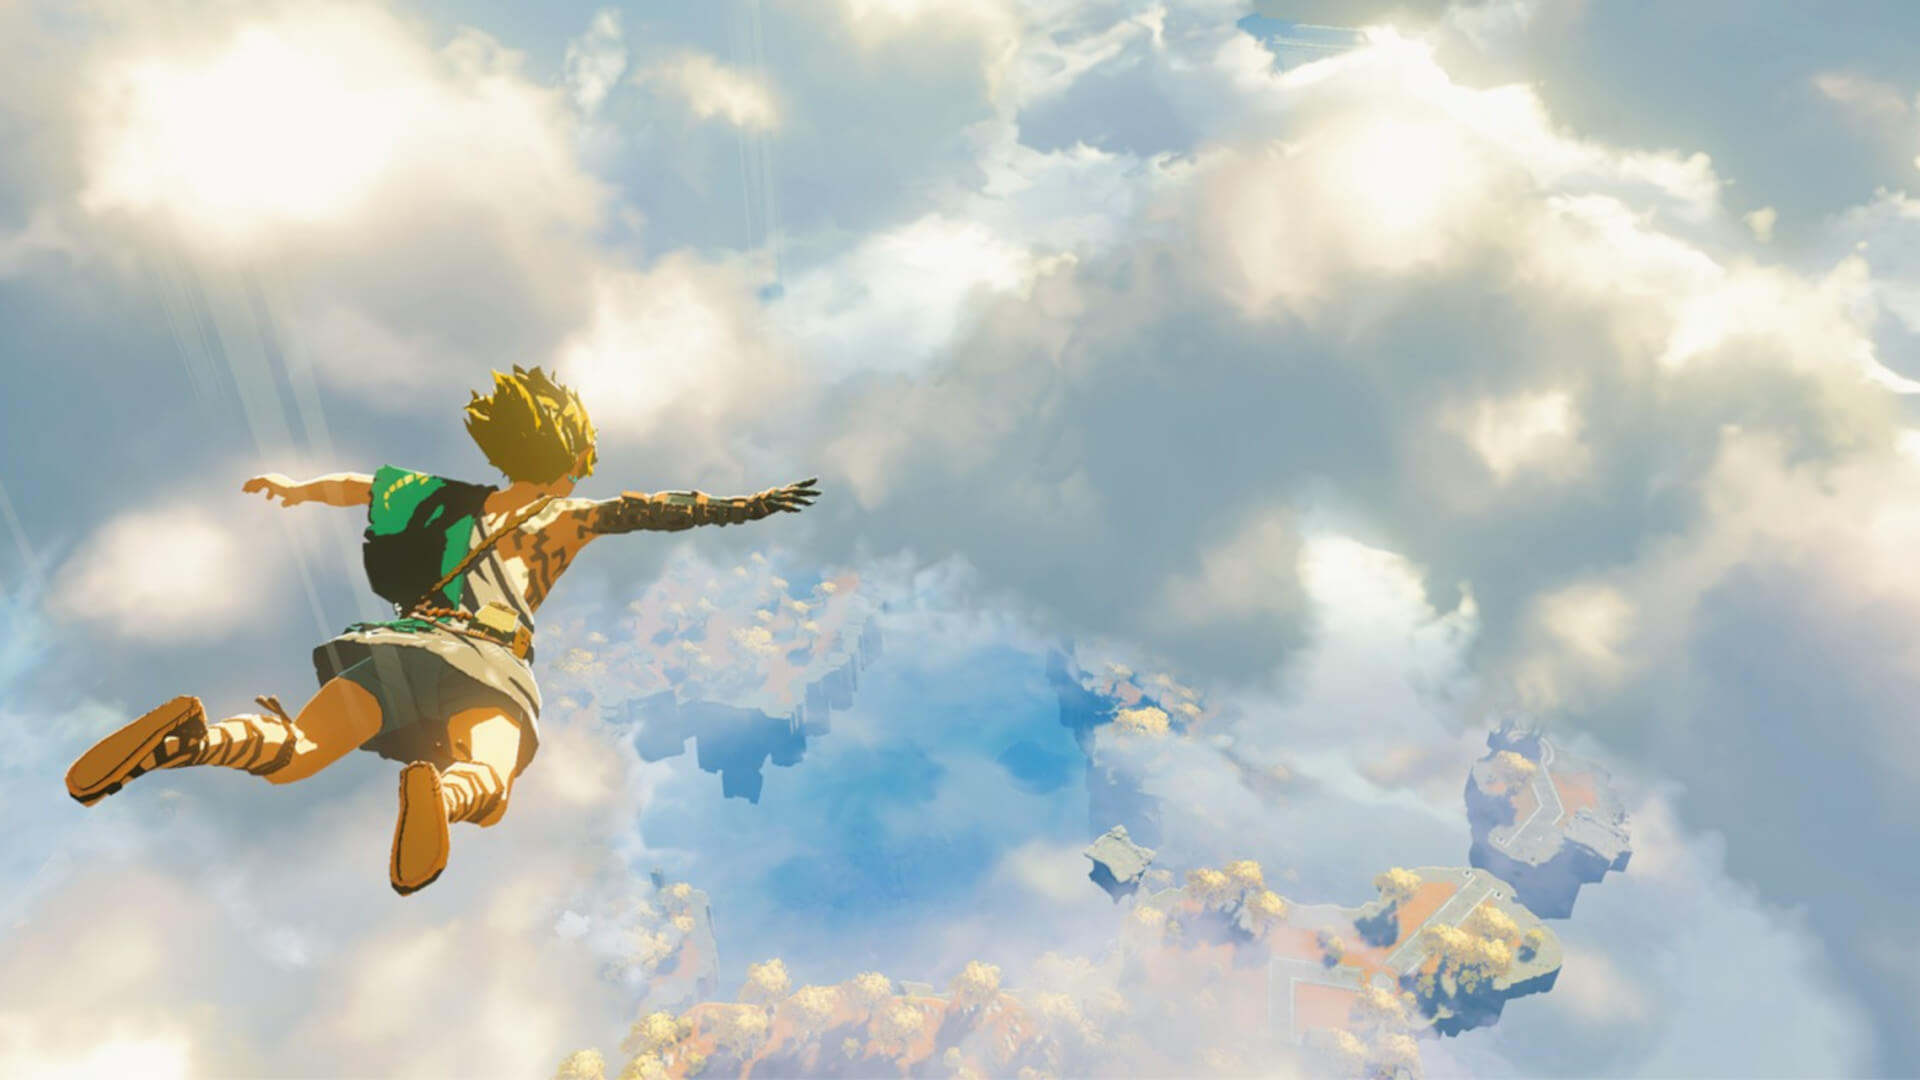 Link soaring through the sky in the Breath of the Wild sequel, which was recently delayed